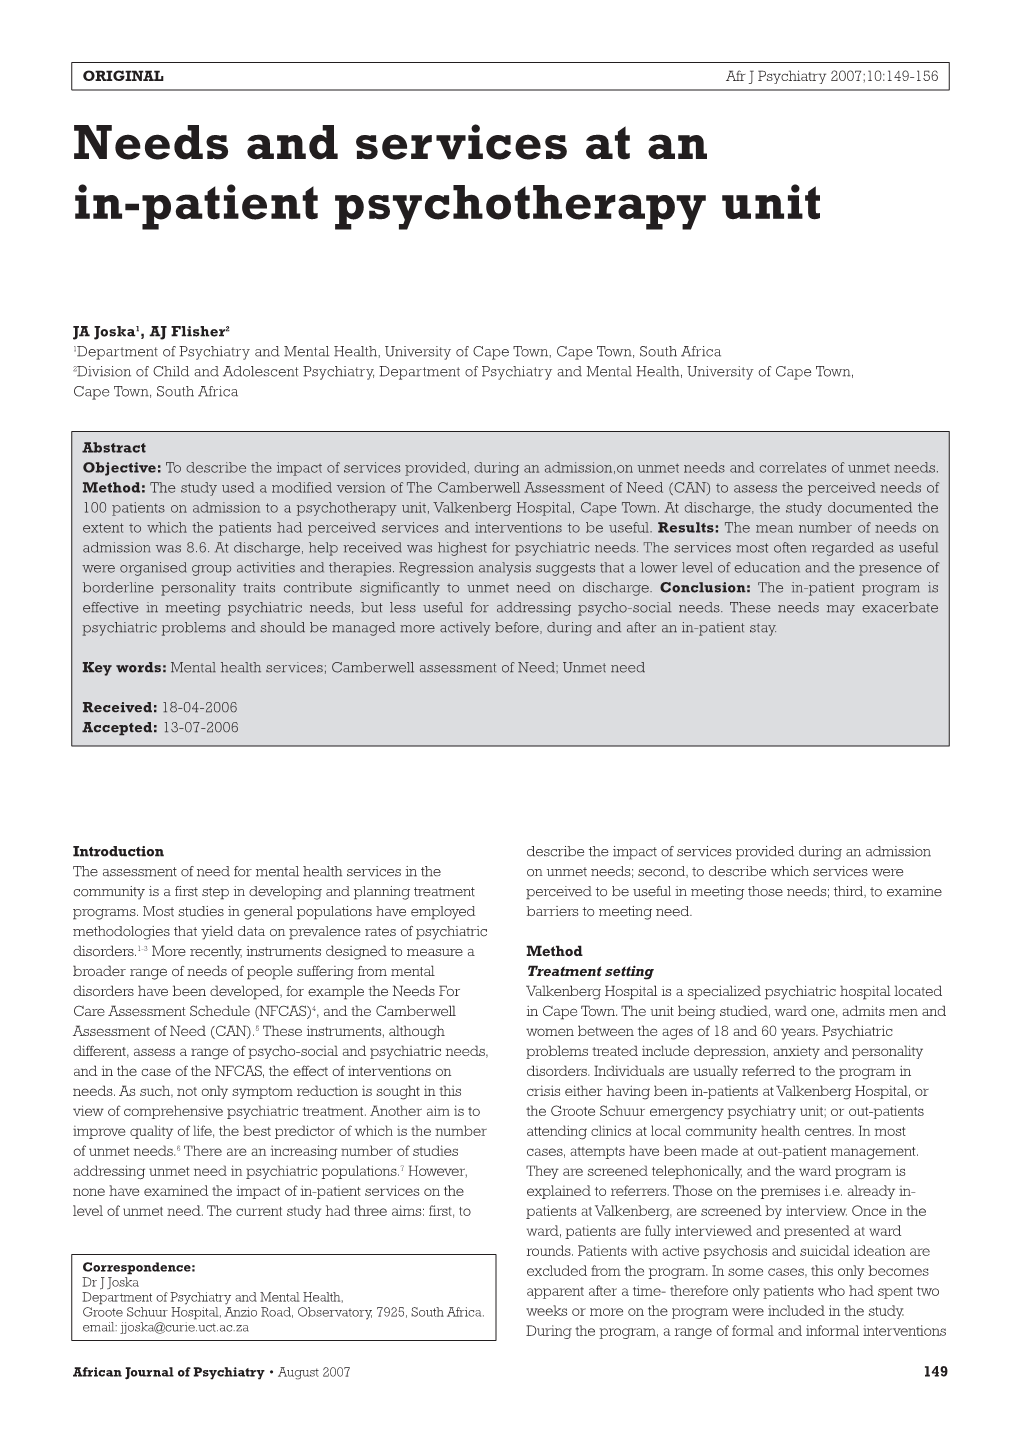 Needs and Services at an In-Patient Psychotherapy Unit JA Joska1